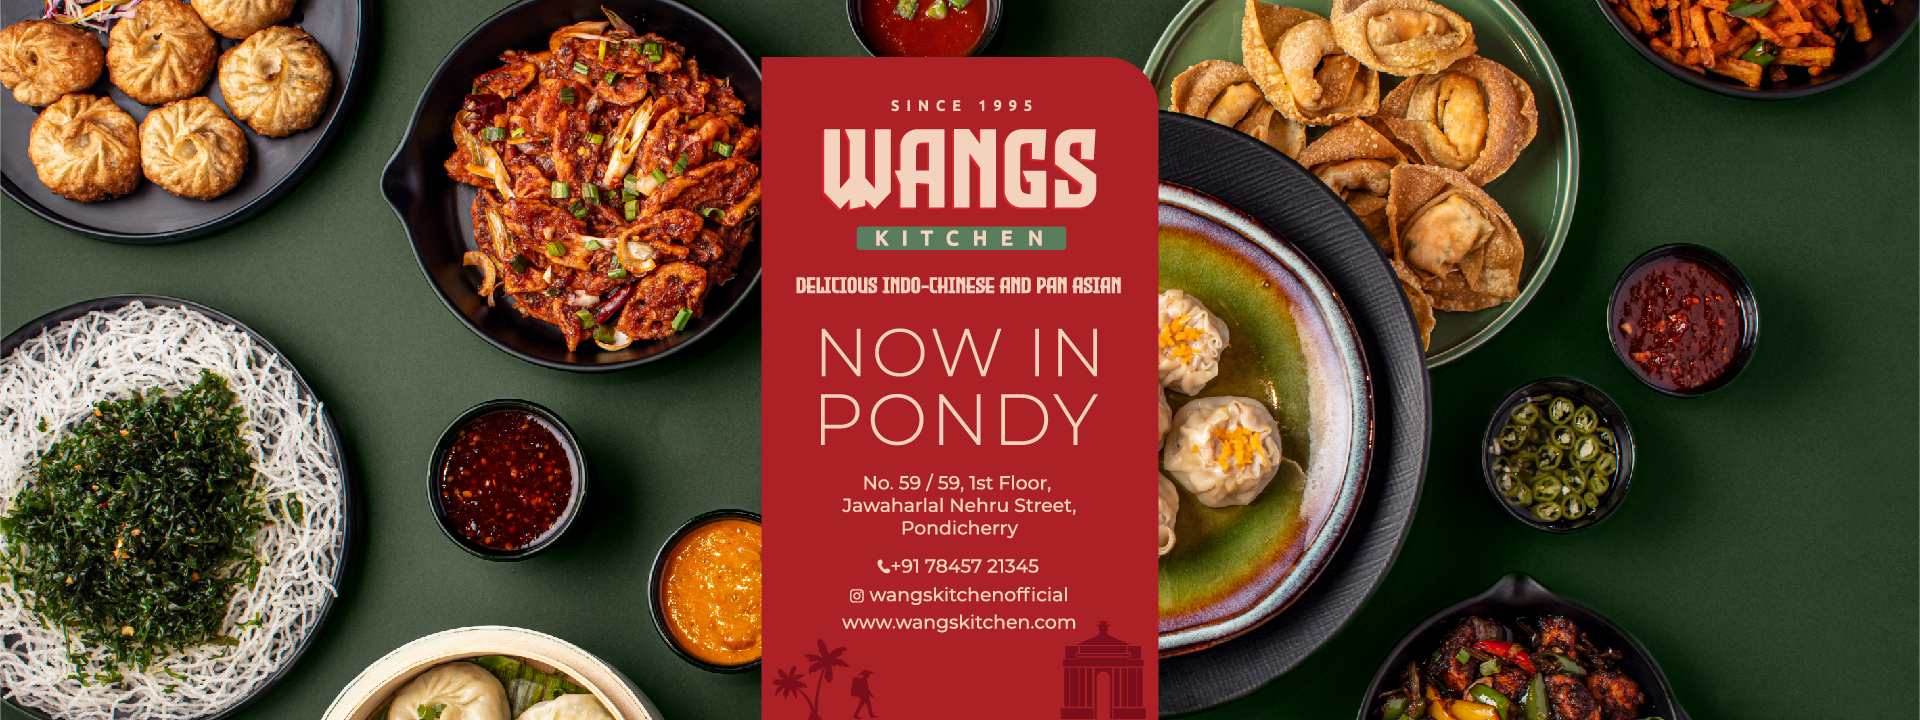 Wangs New Outlet in pondicherry